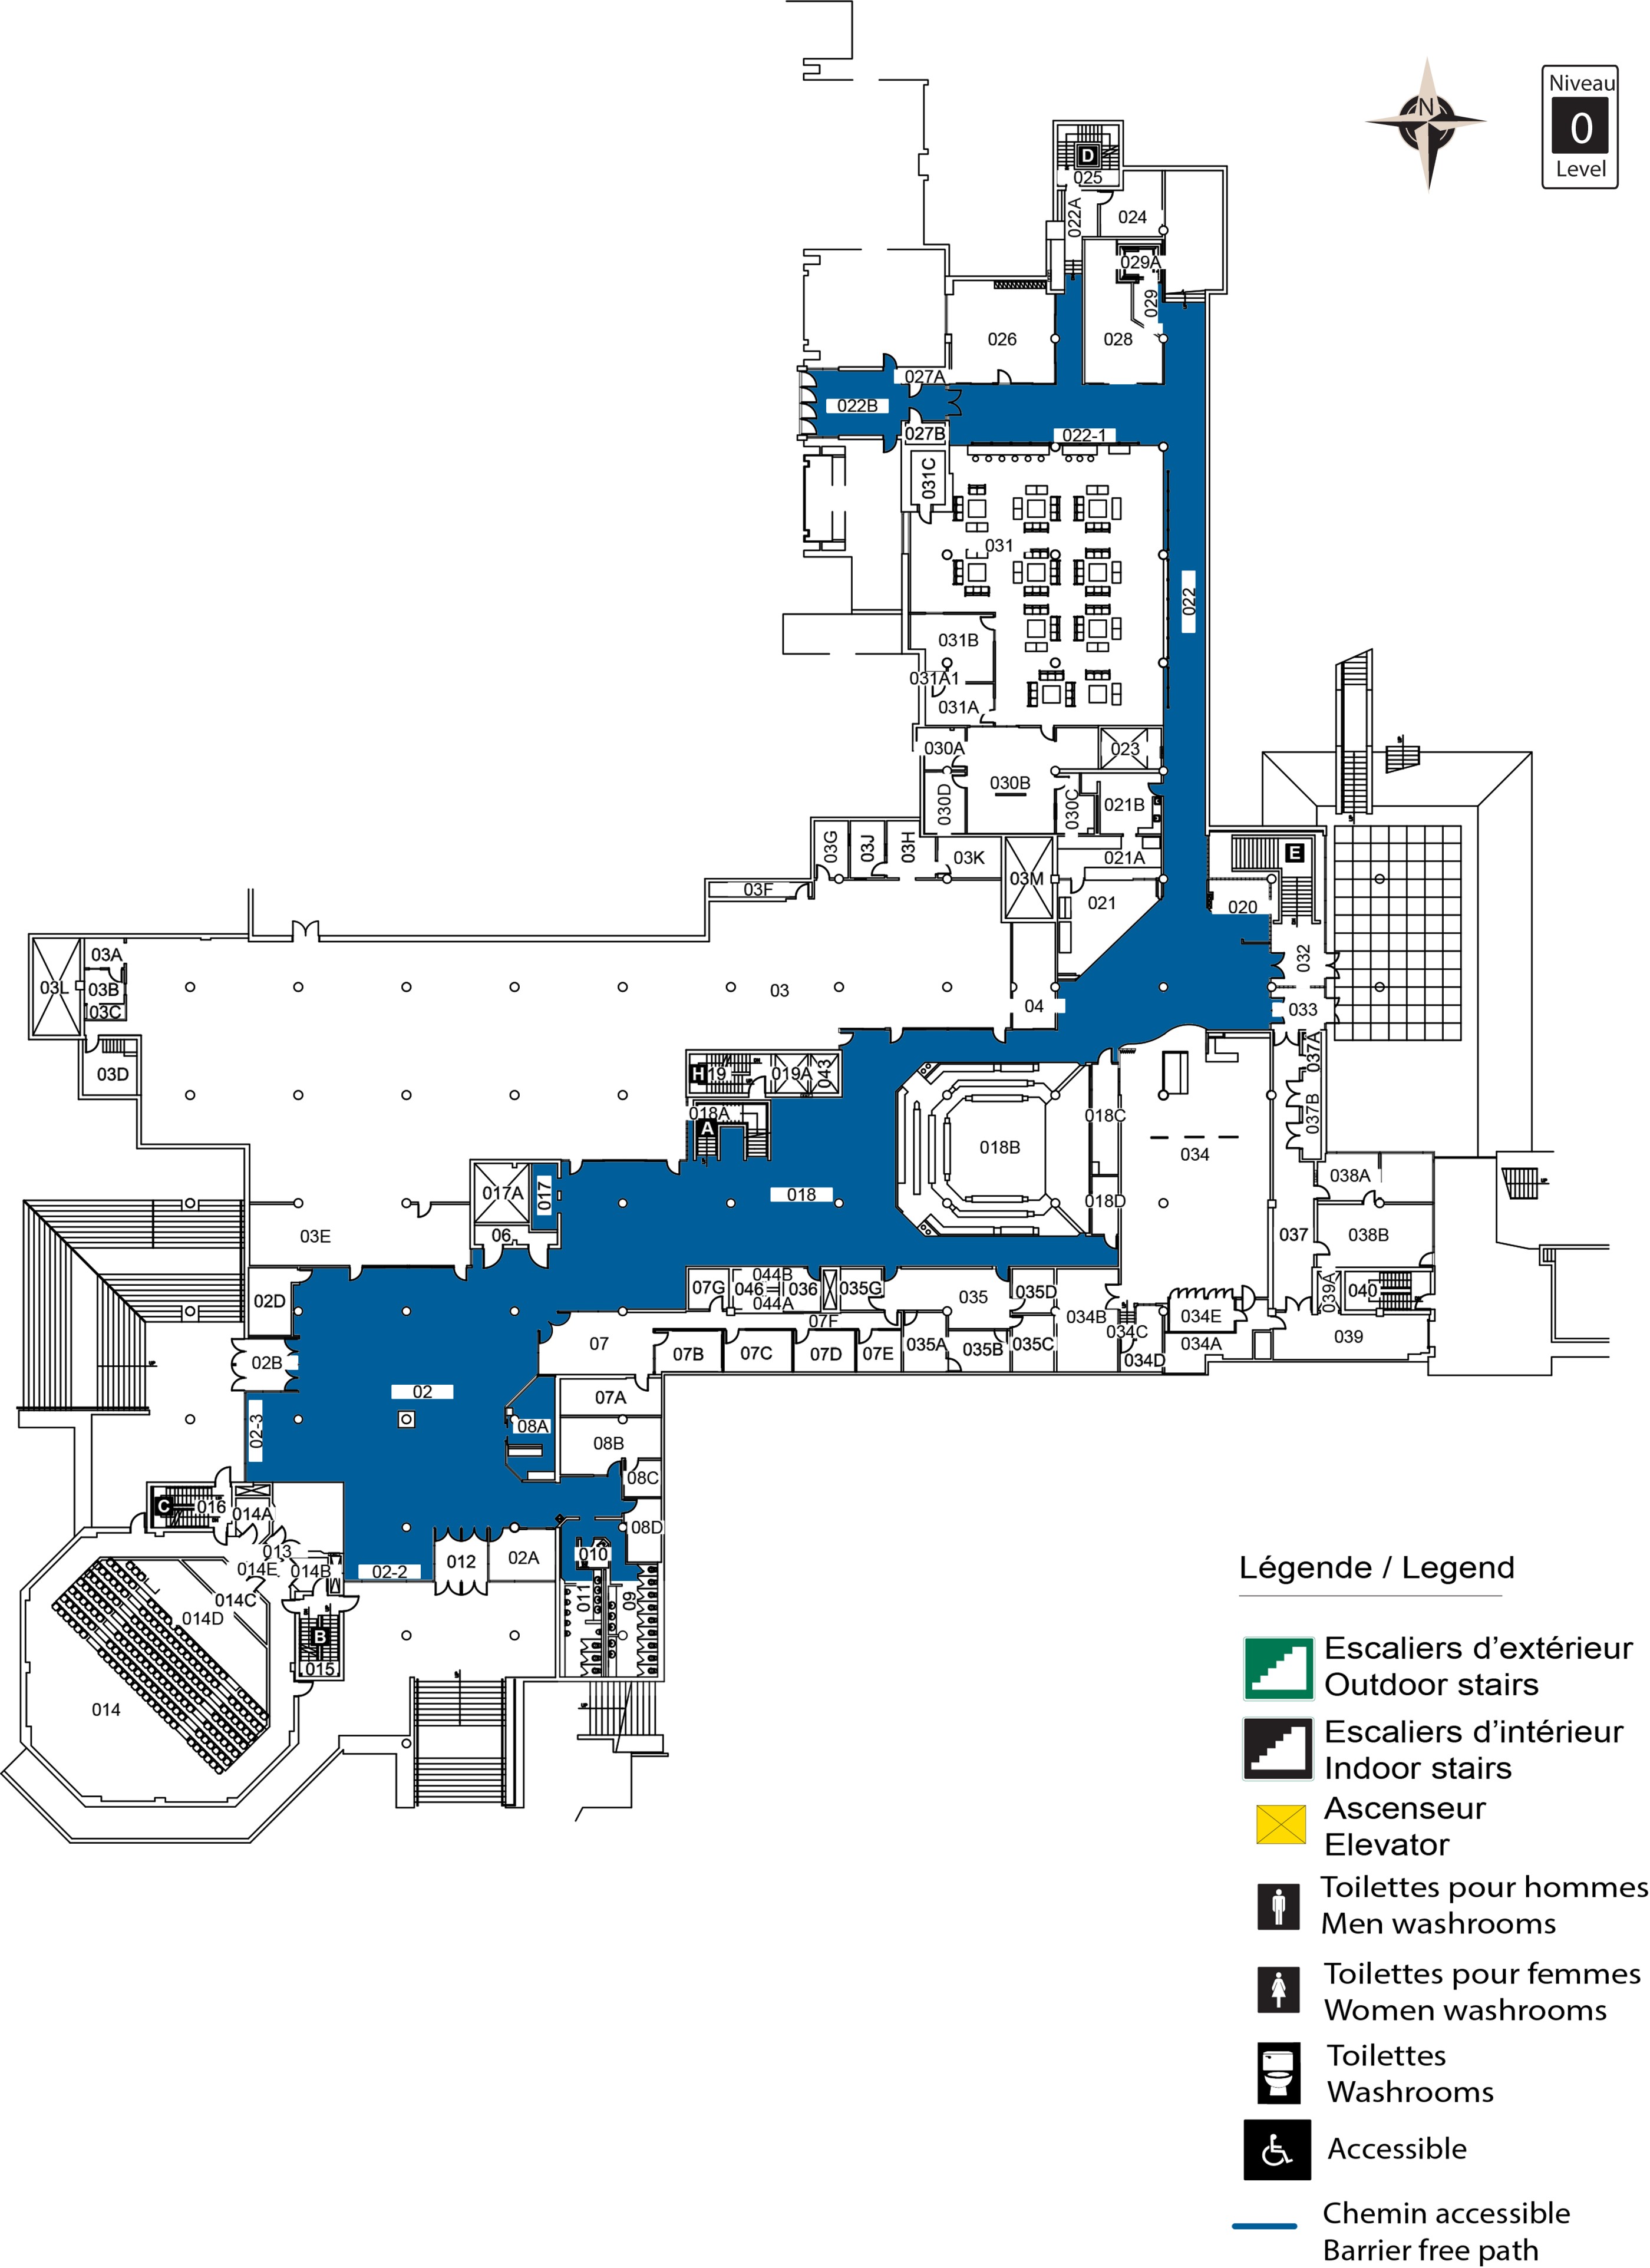 Accessible map of UCU level 0